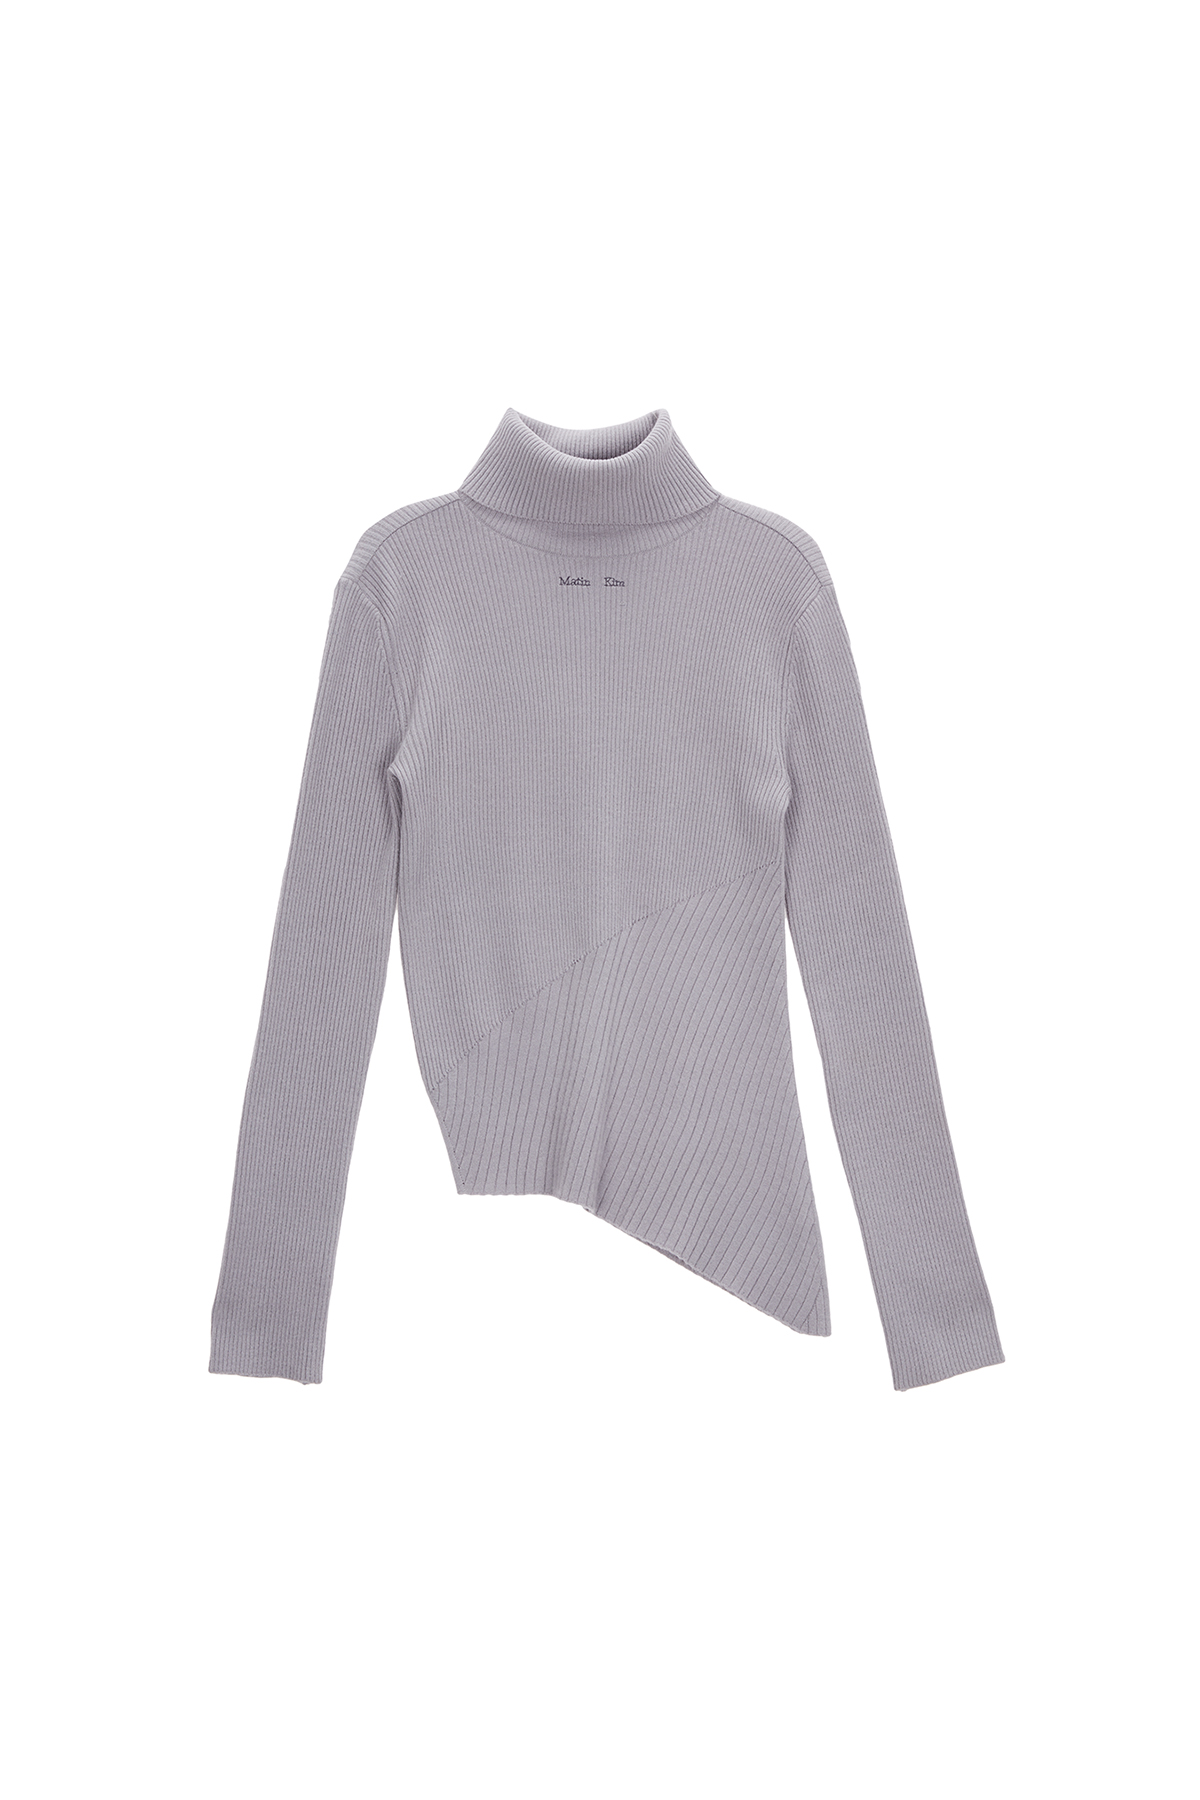 TURTLE NECK UNBALANCE KNIT PULLOVER IN GREY